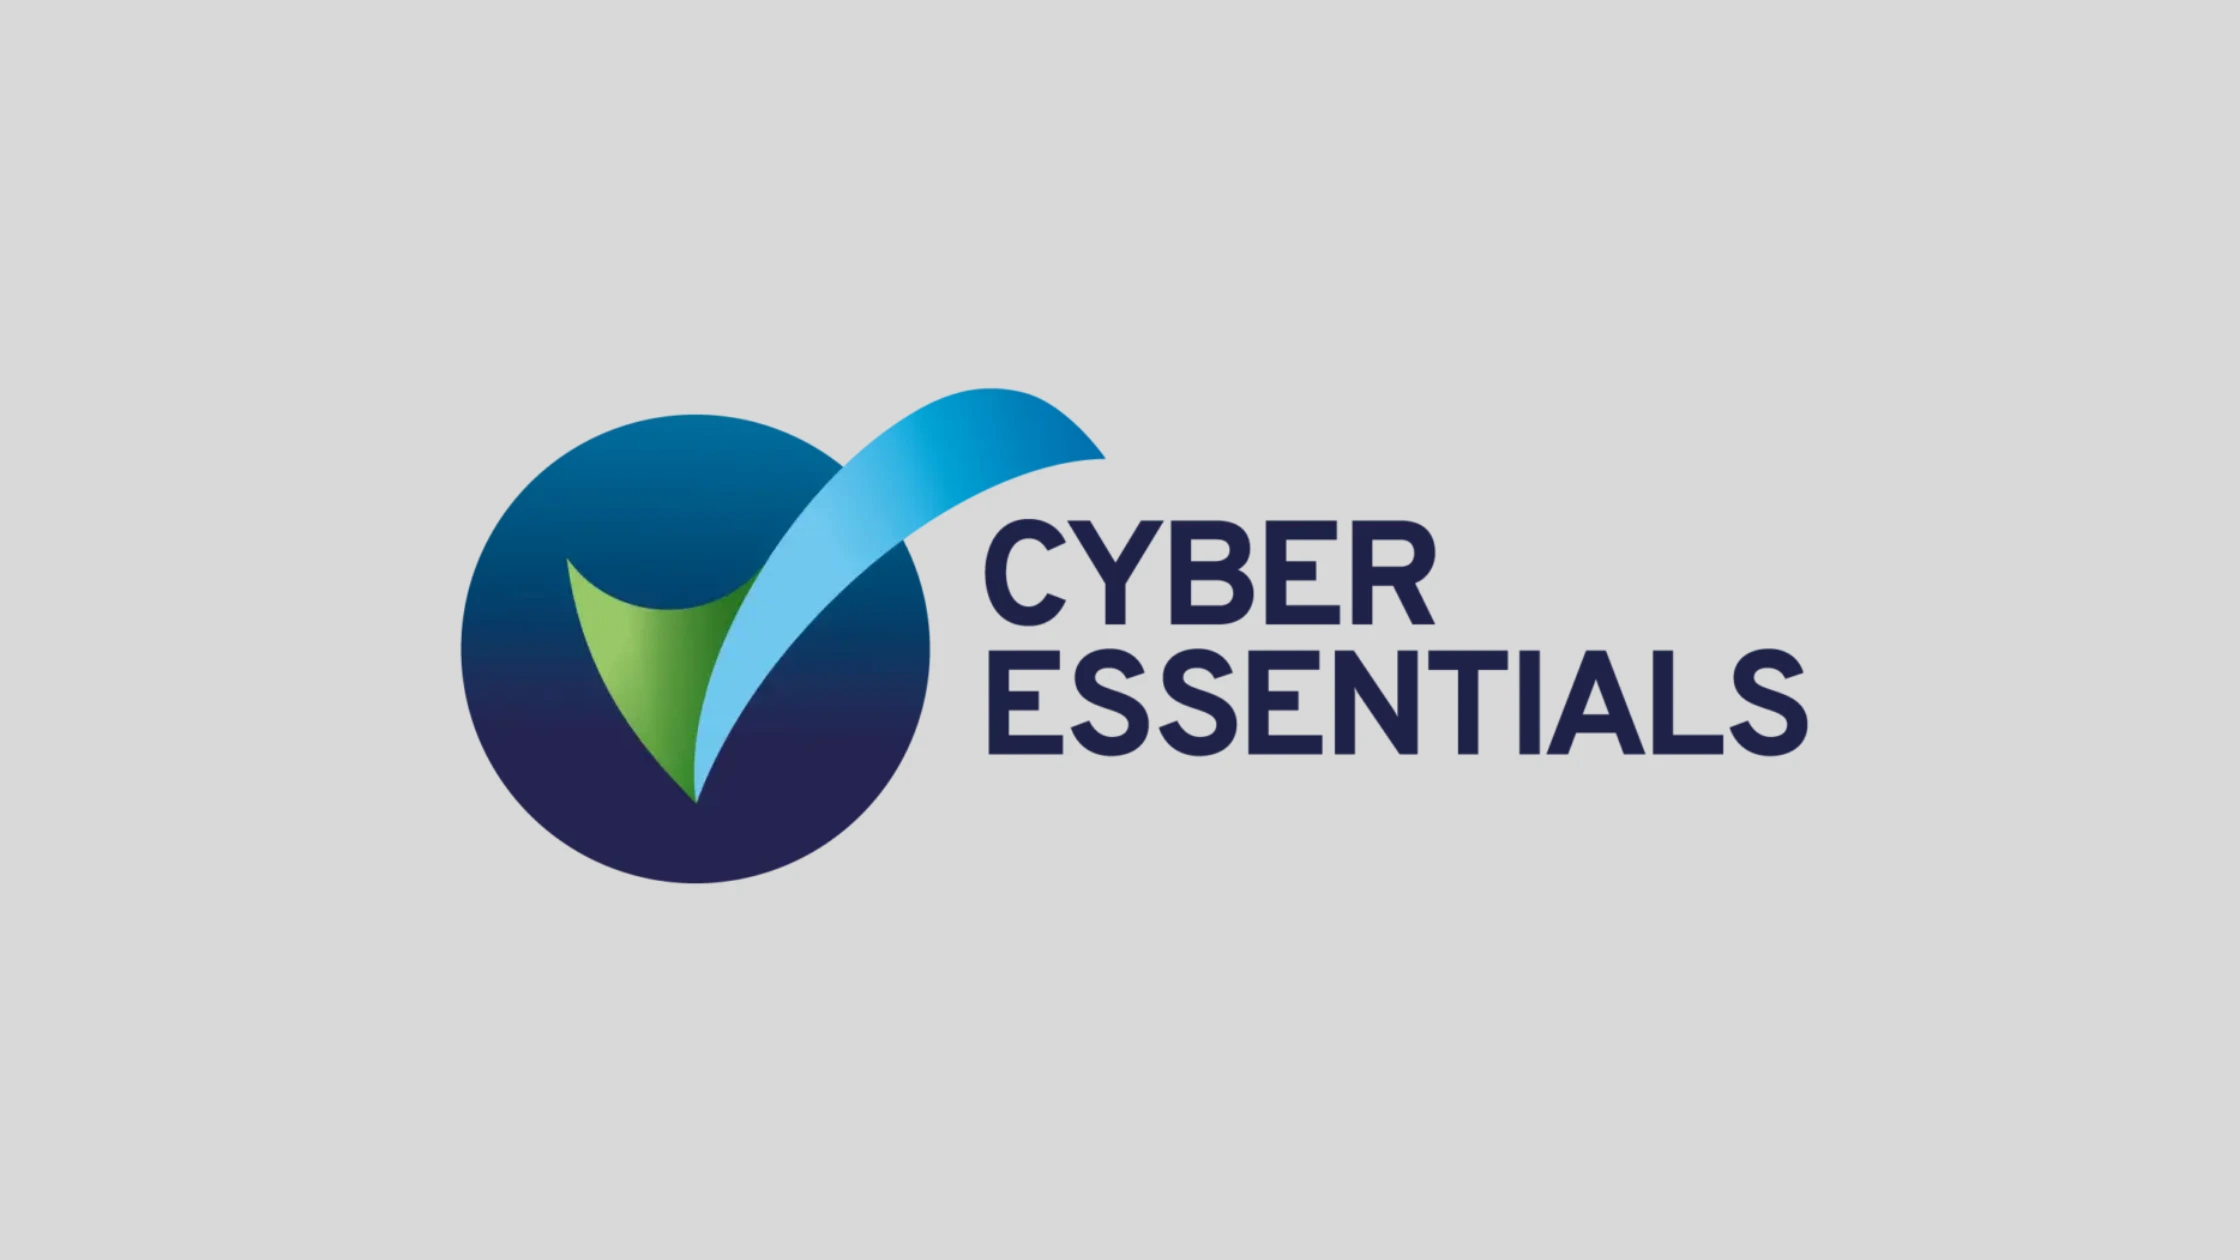 Cyber Essentials Logo - a blue and green tick extending from a blue circle next to the words Cyber Essentials